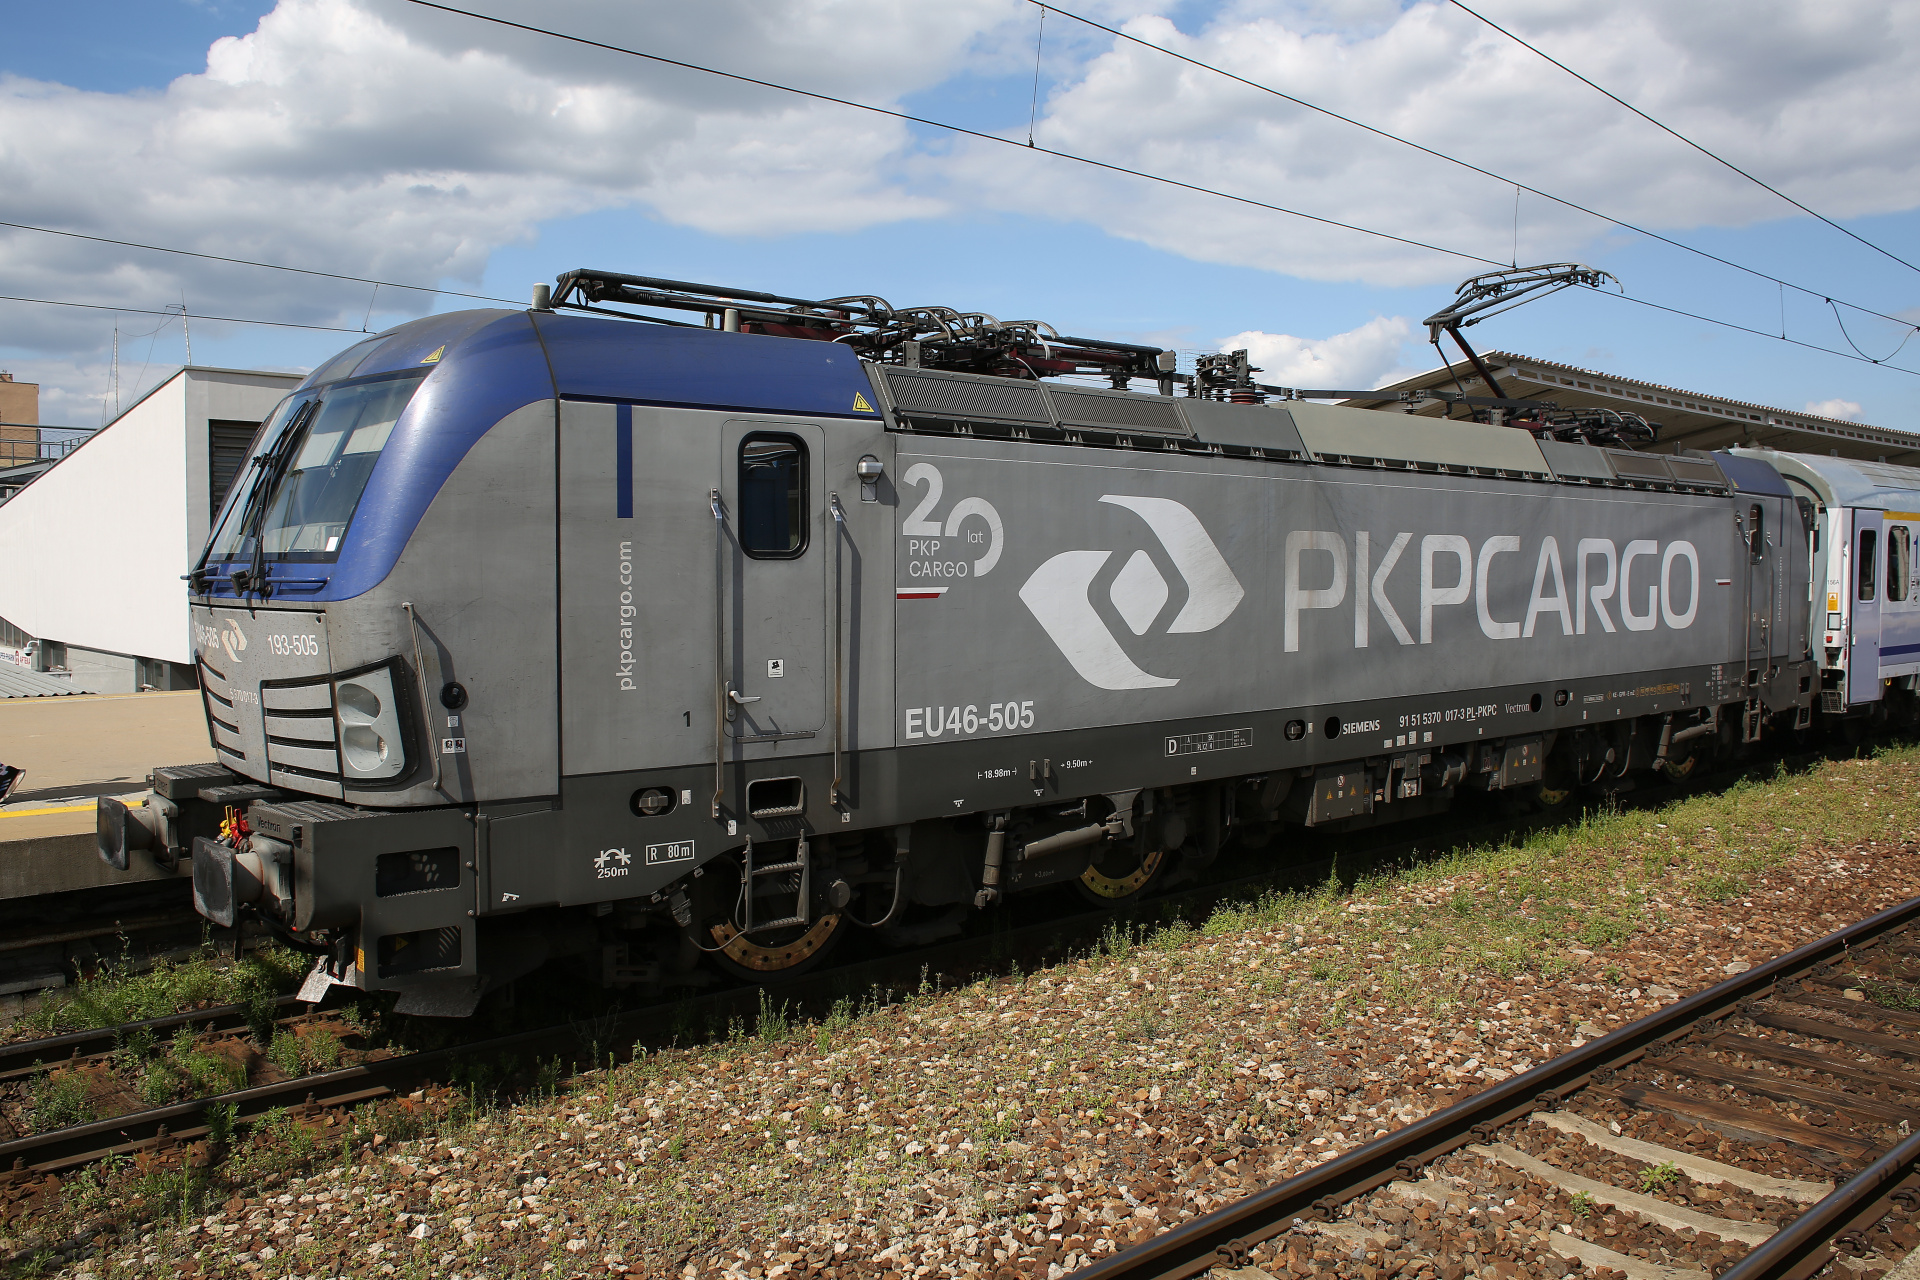 X4-E-Loco-AB Vectron MS EU46-505 193-505 (20 years of PKP Cargo sticker) (Vehicles » Trains and Locomotives » Siemens Vectron)